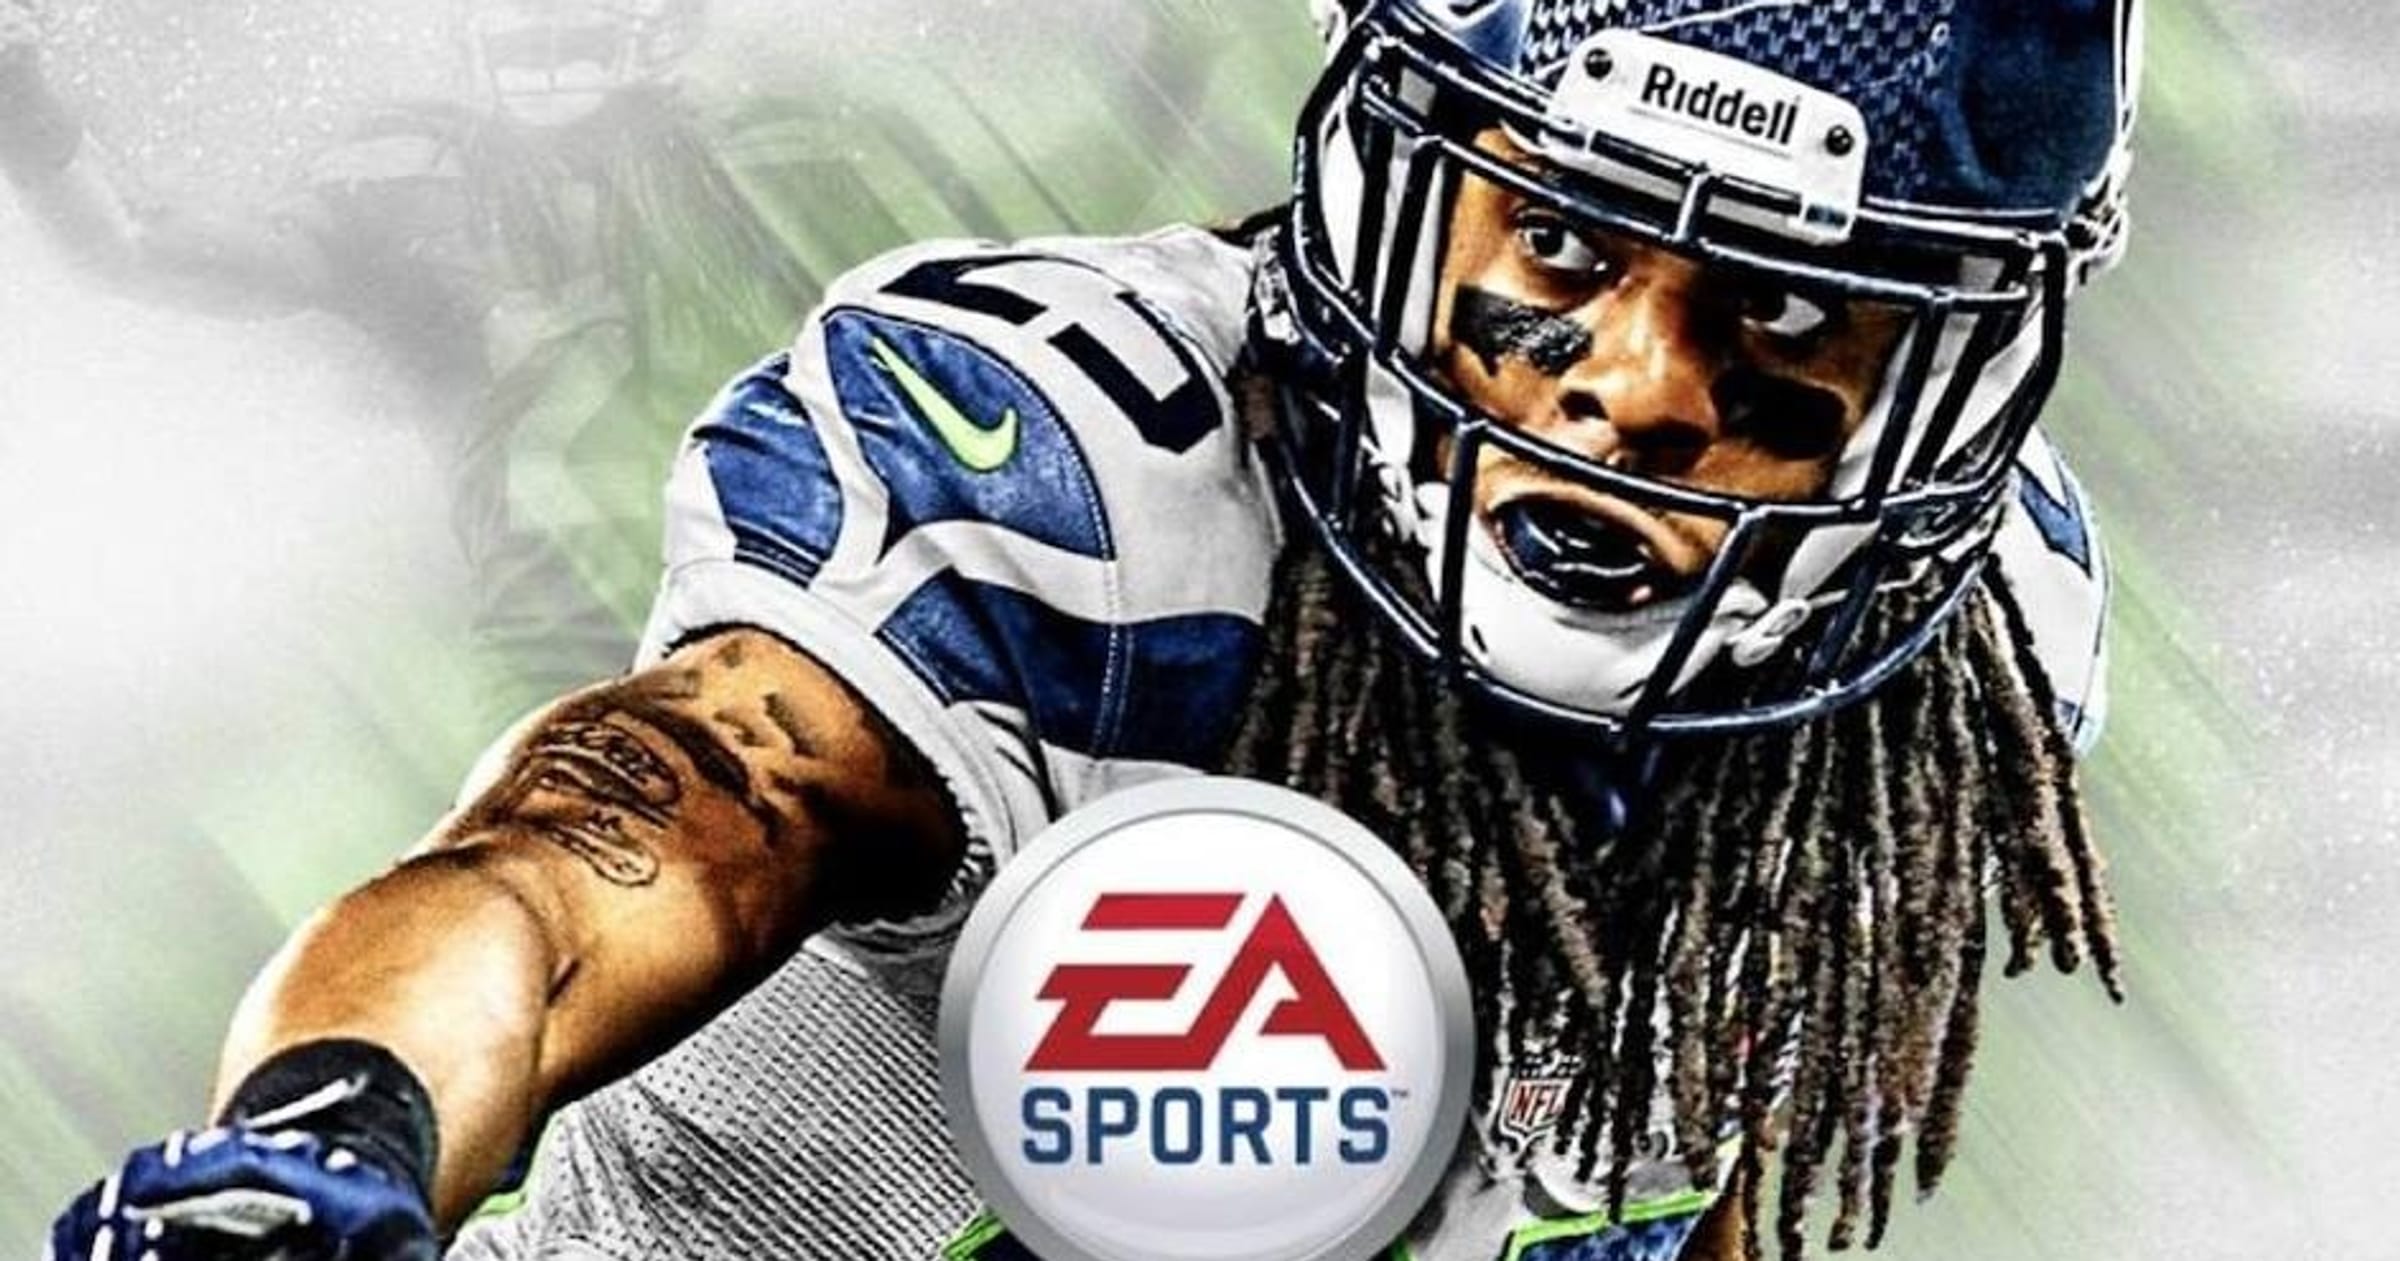 The Best Madden NFL Cover Athletes, Ranked